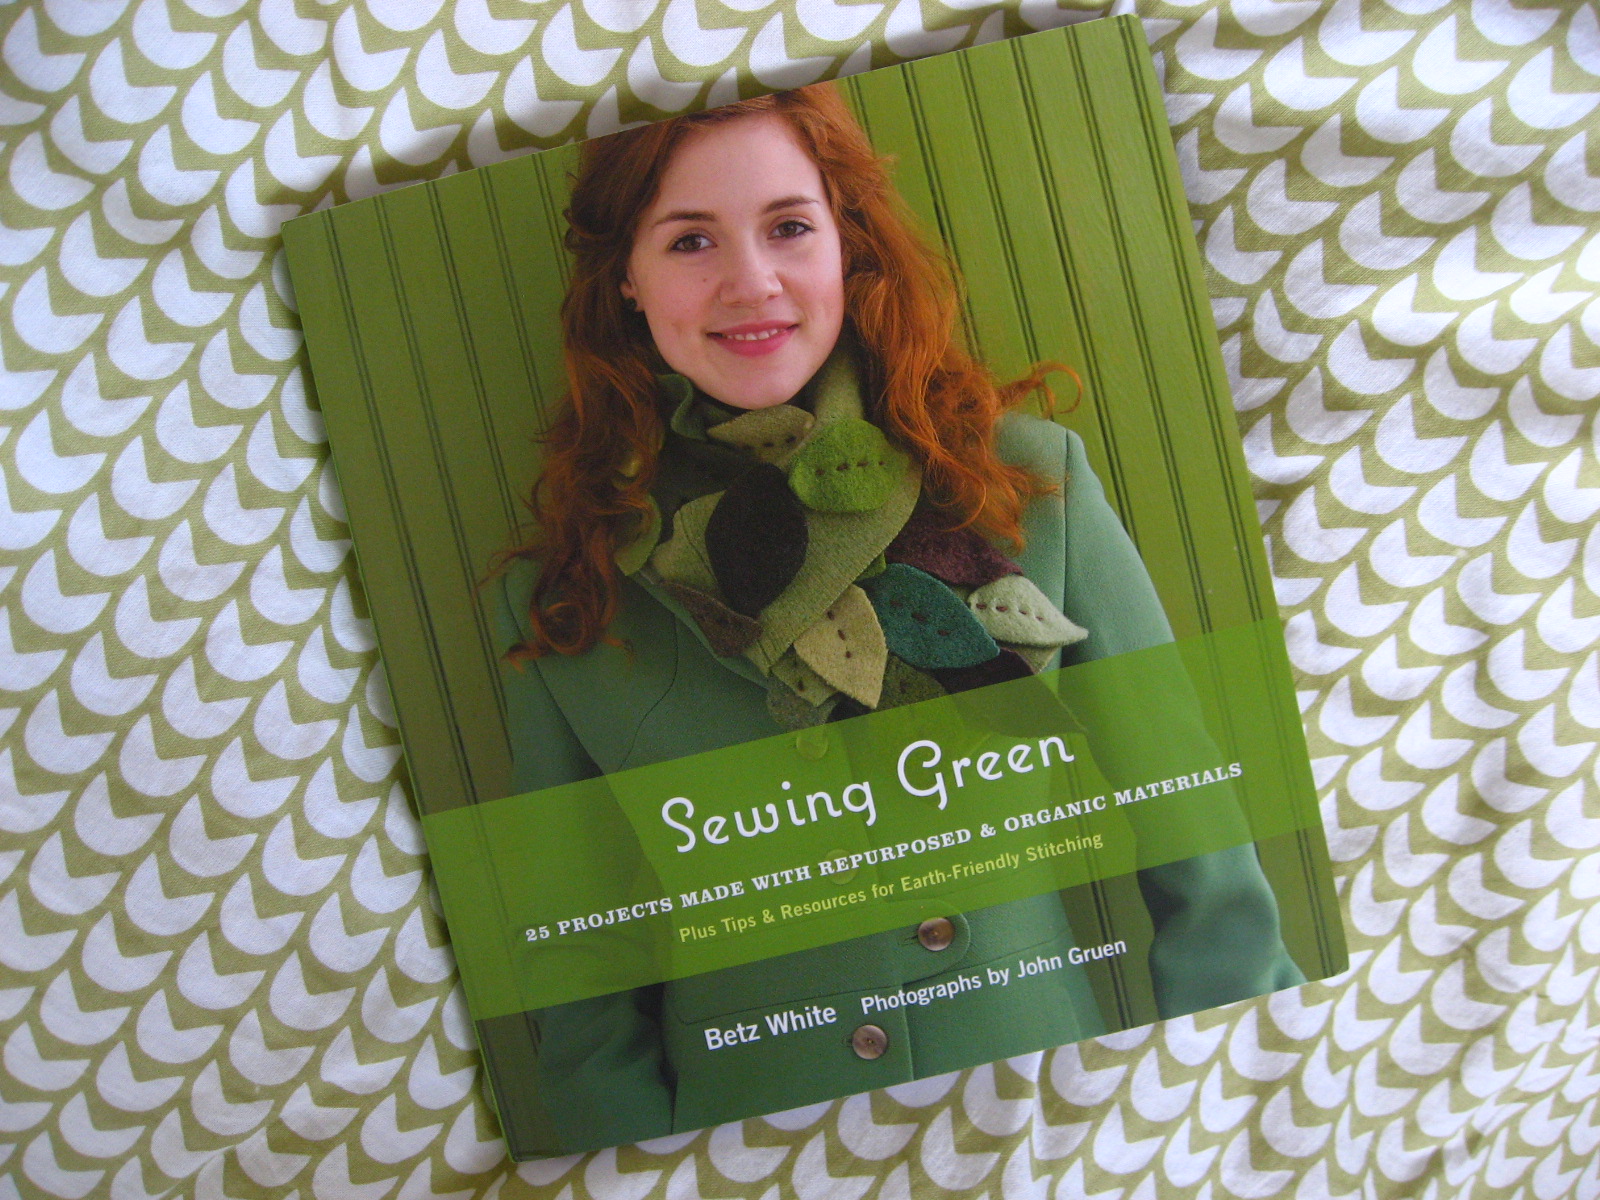 Sewing Green